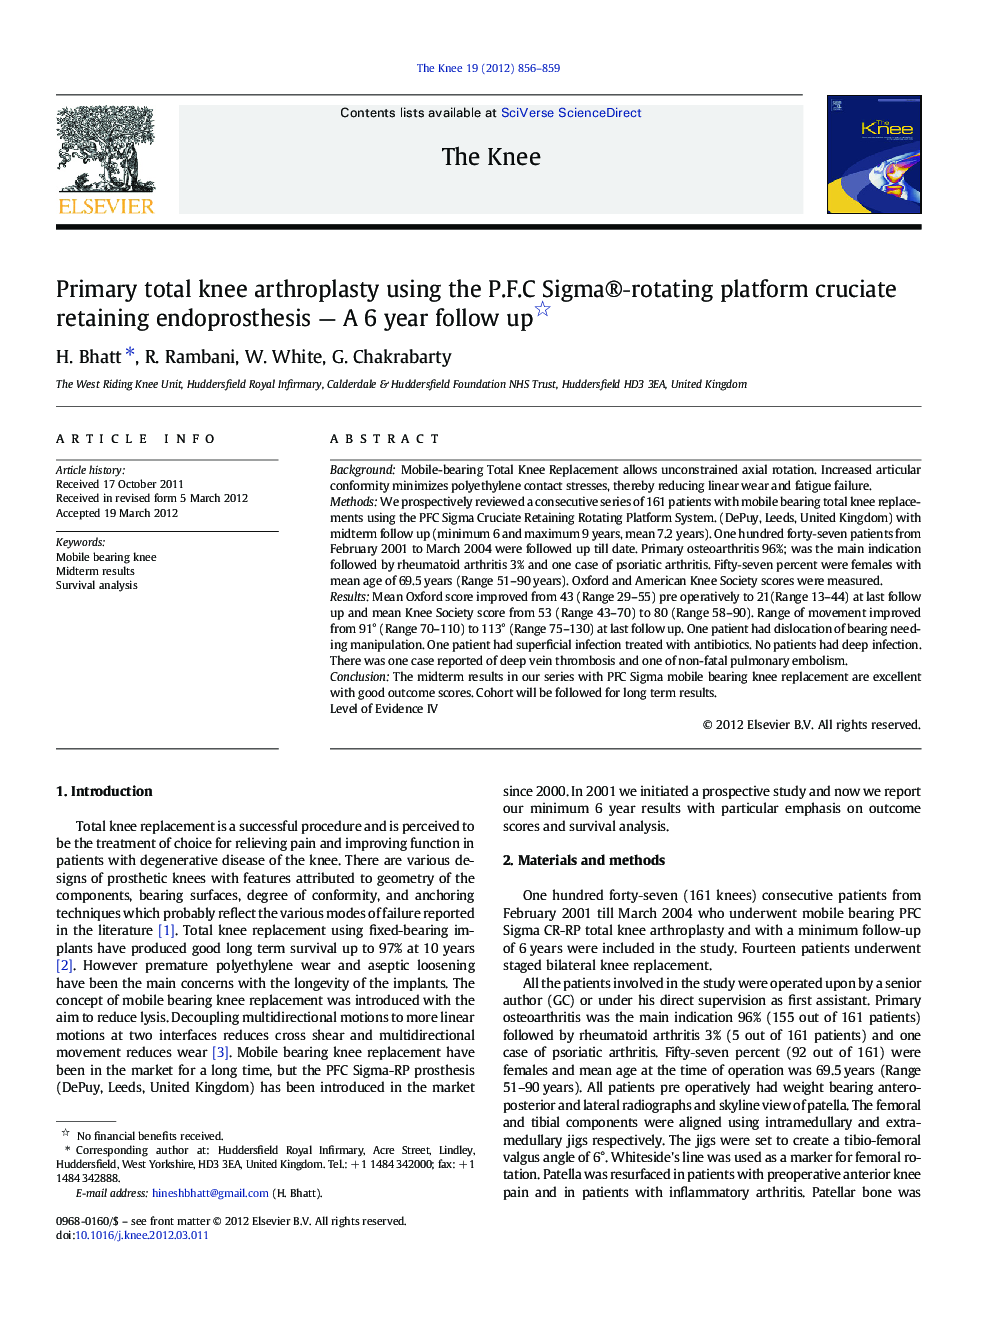 Primary total knee arthroplasty using the P.F.C Sigma®‐rotating platform cruciate retaining endoprosthesis — A 6 year follow up 